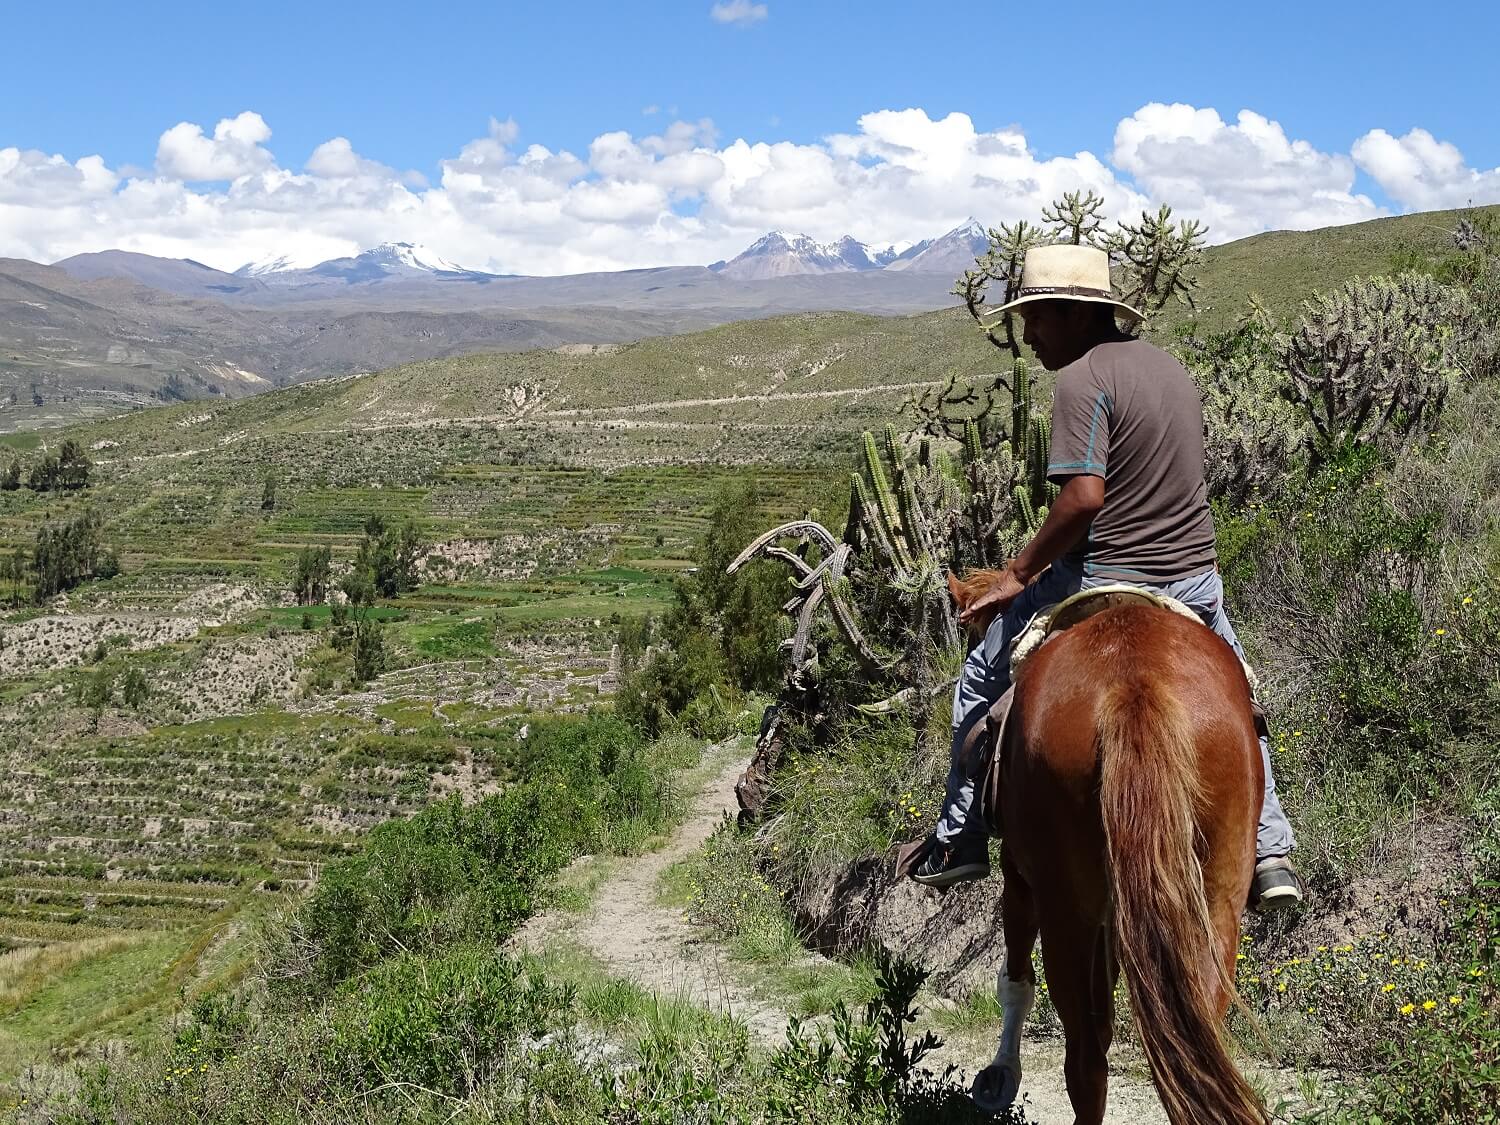 11Horseriding through the terraces of the Colca Canyon with volcanoes on the background, as part of a homestay programme with RESPONSible Travel Peru